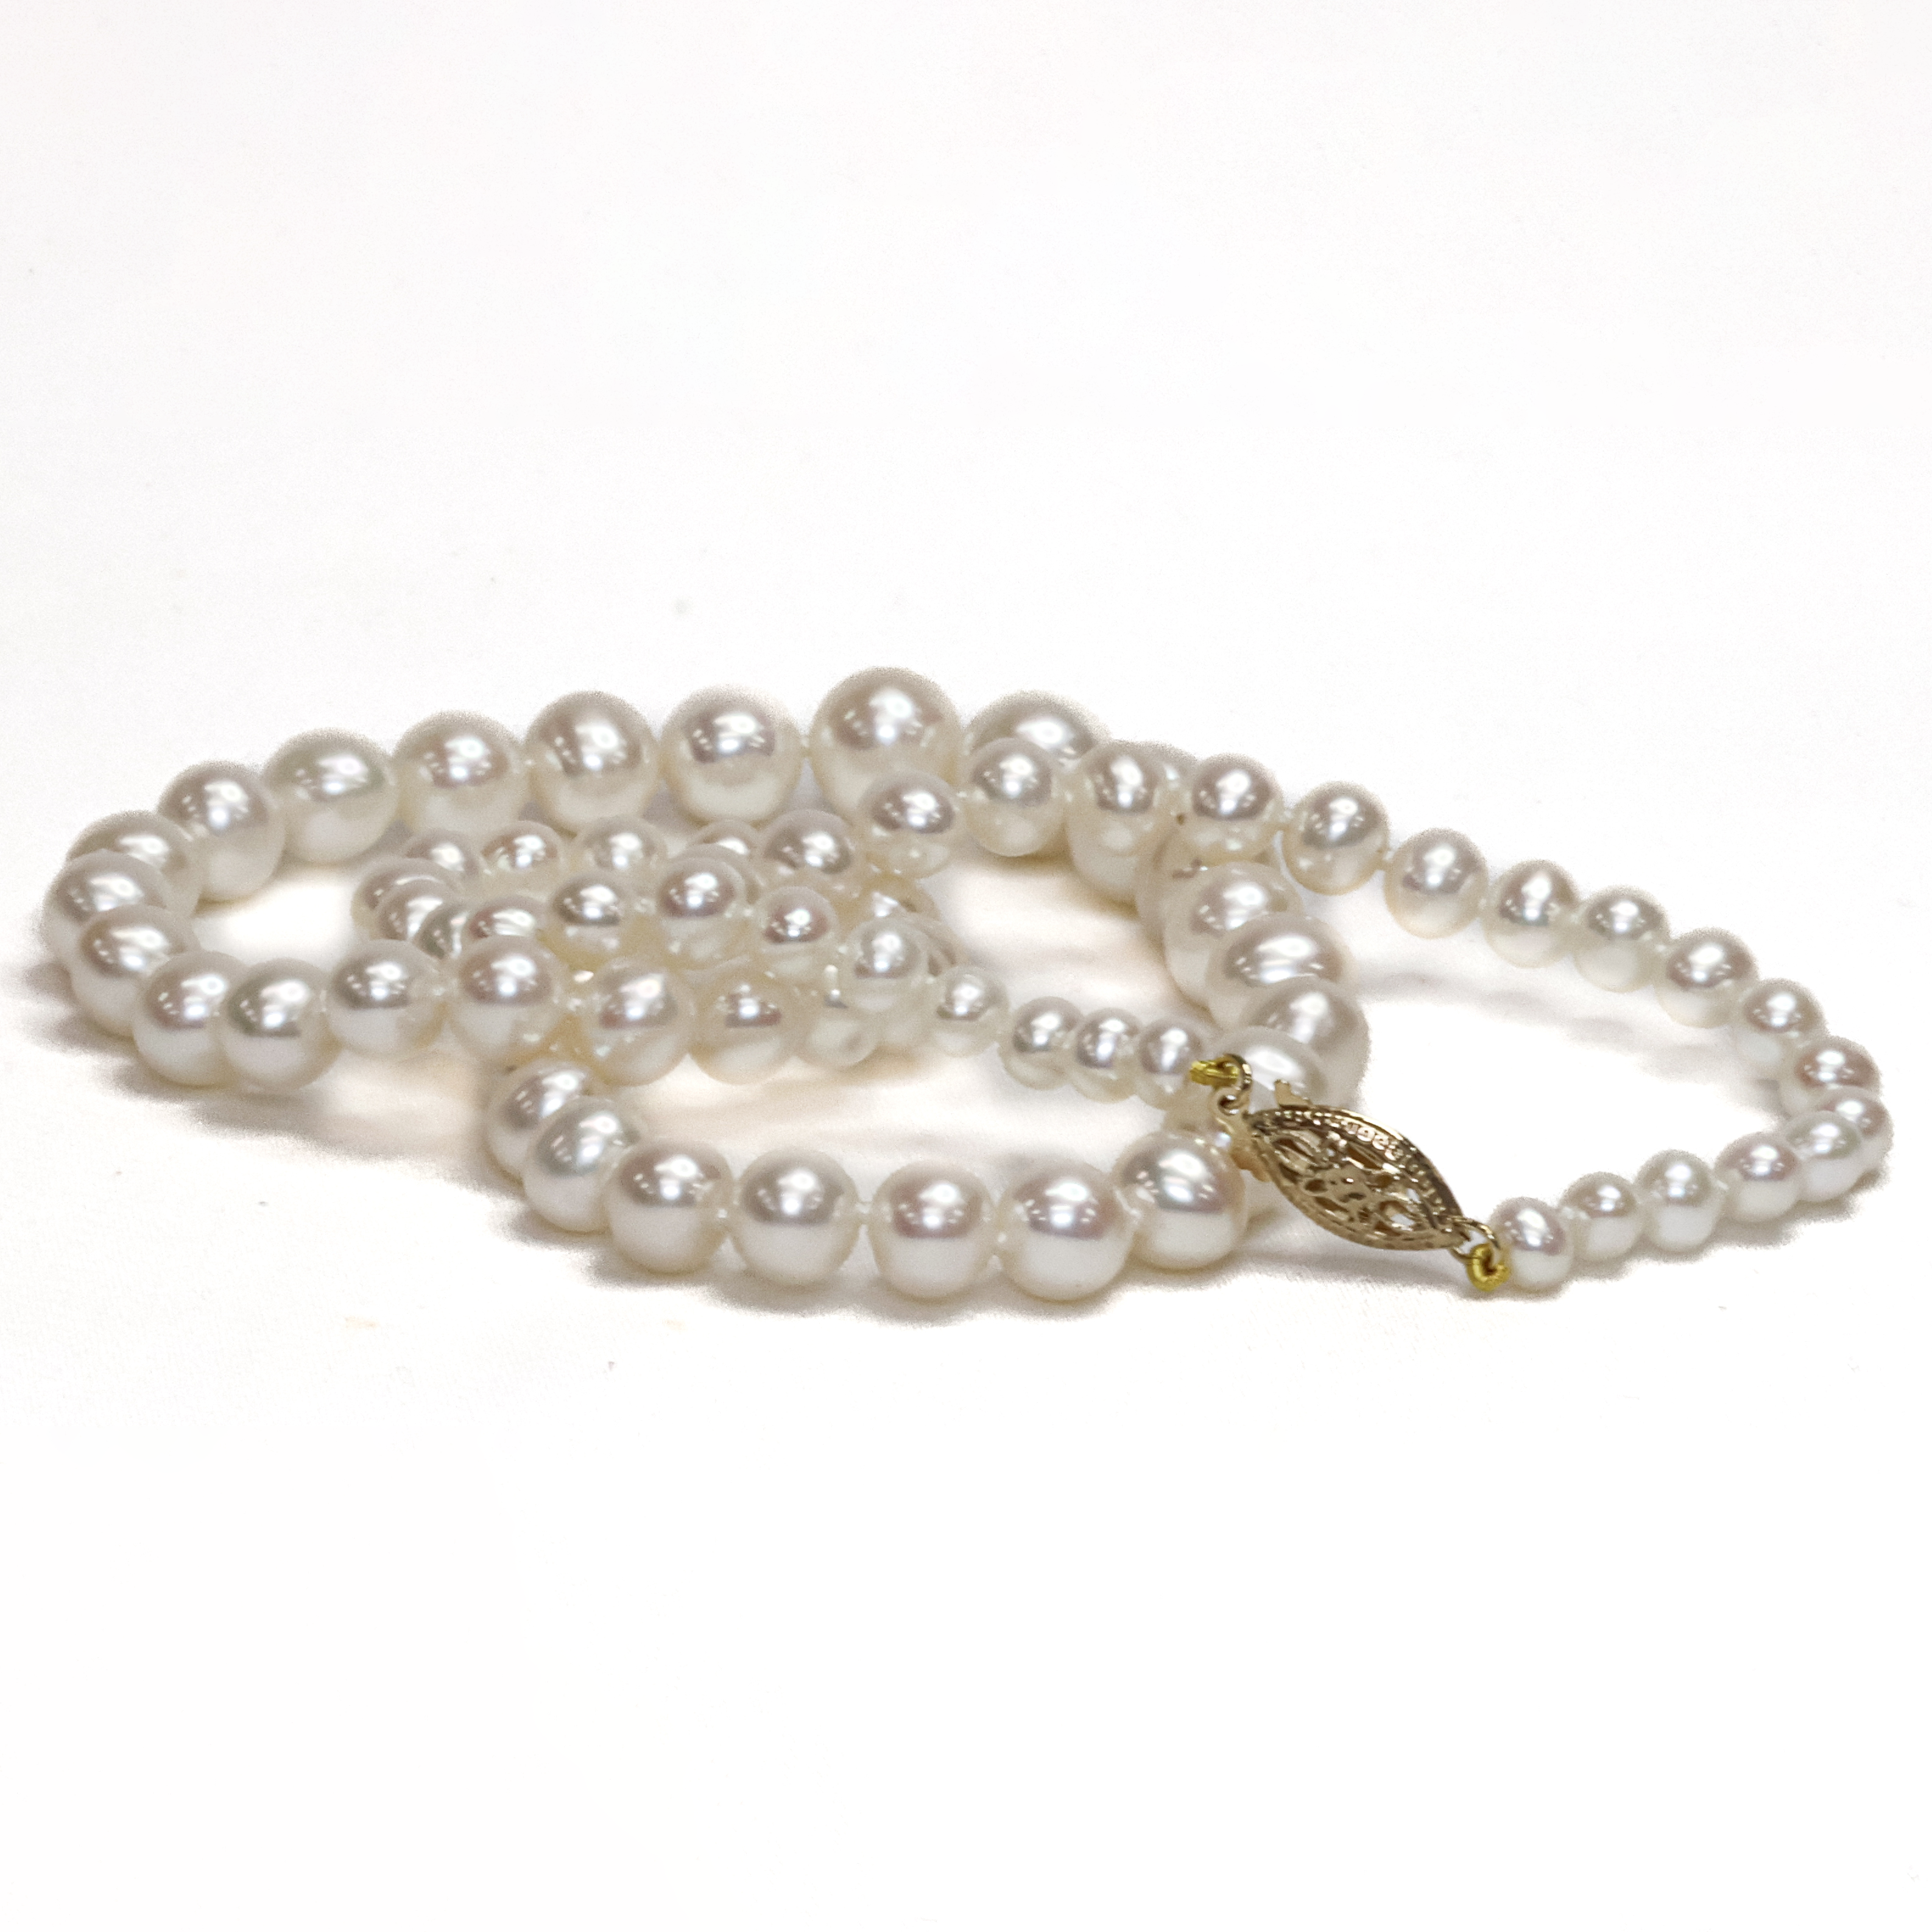 Freshwater Pearl Strand with Graduated Round Pearls and a 9K Yellow Gold Clasp